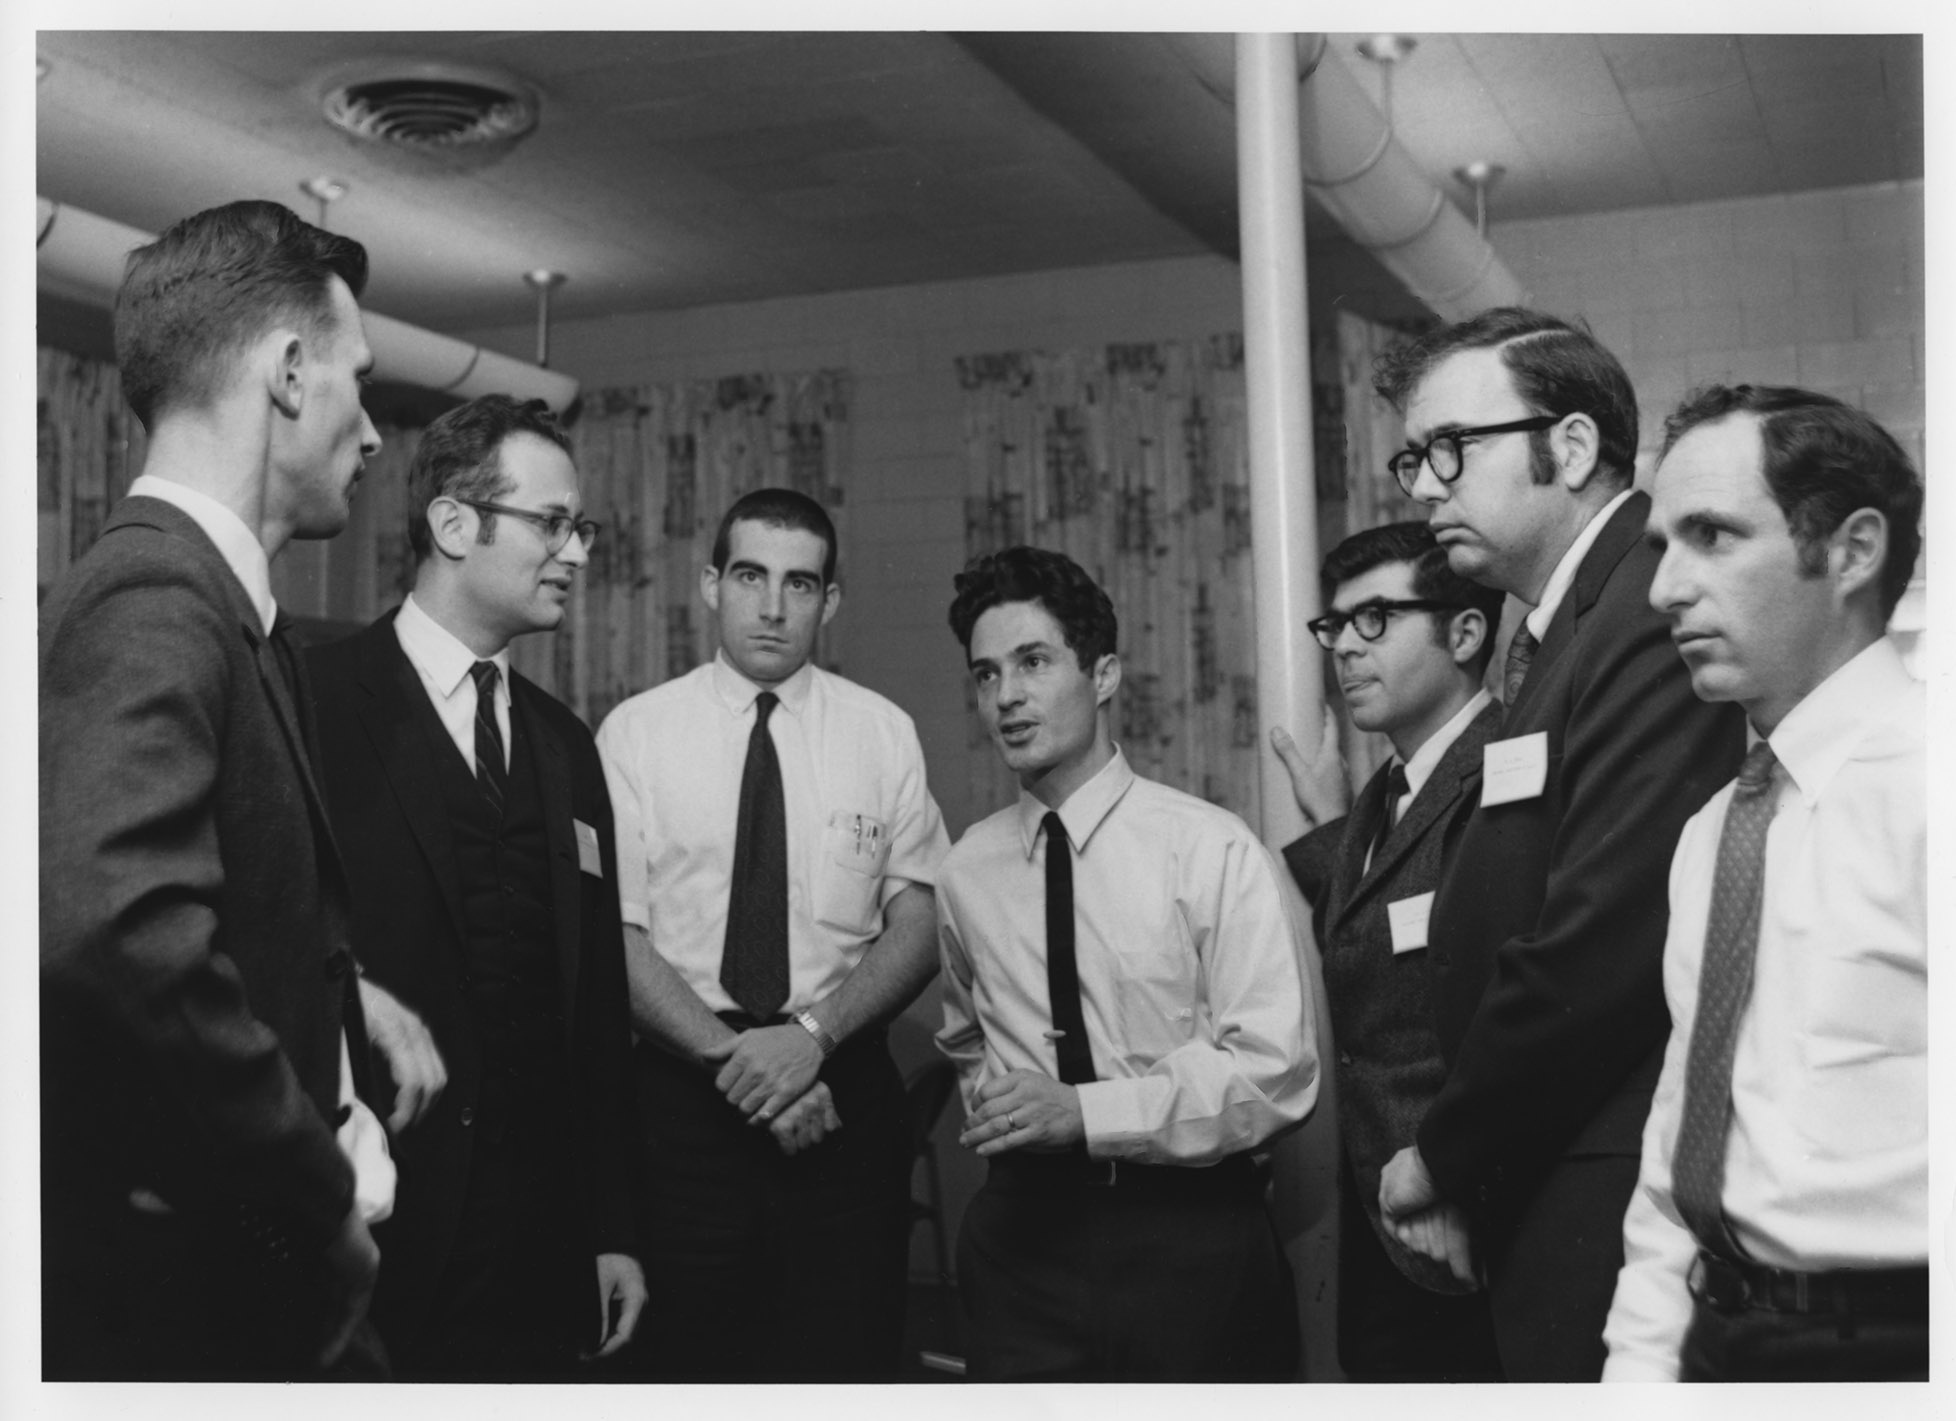 Group of men standing, having a discussion